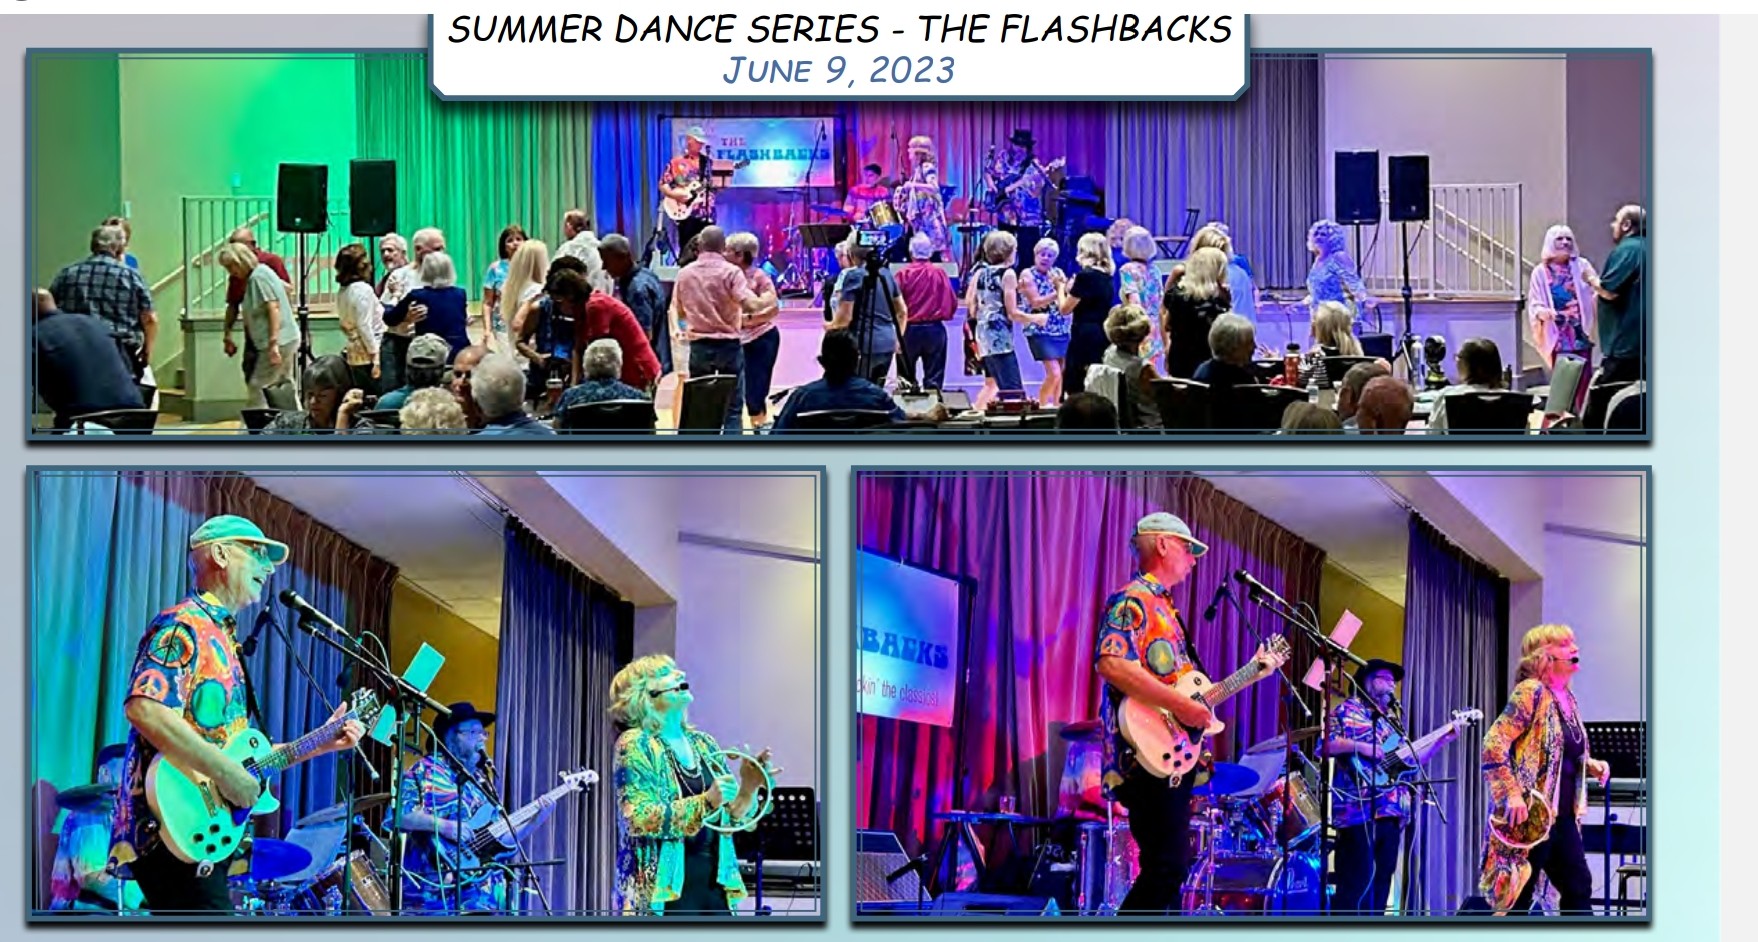 The Flashbacks Summer Dance Party